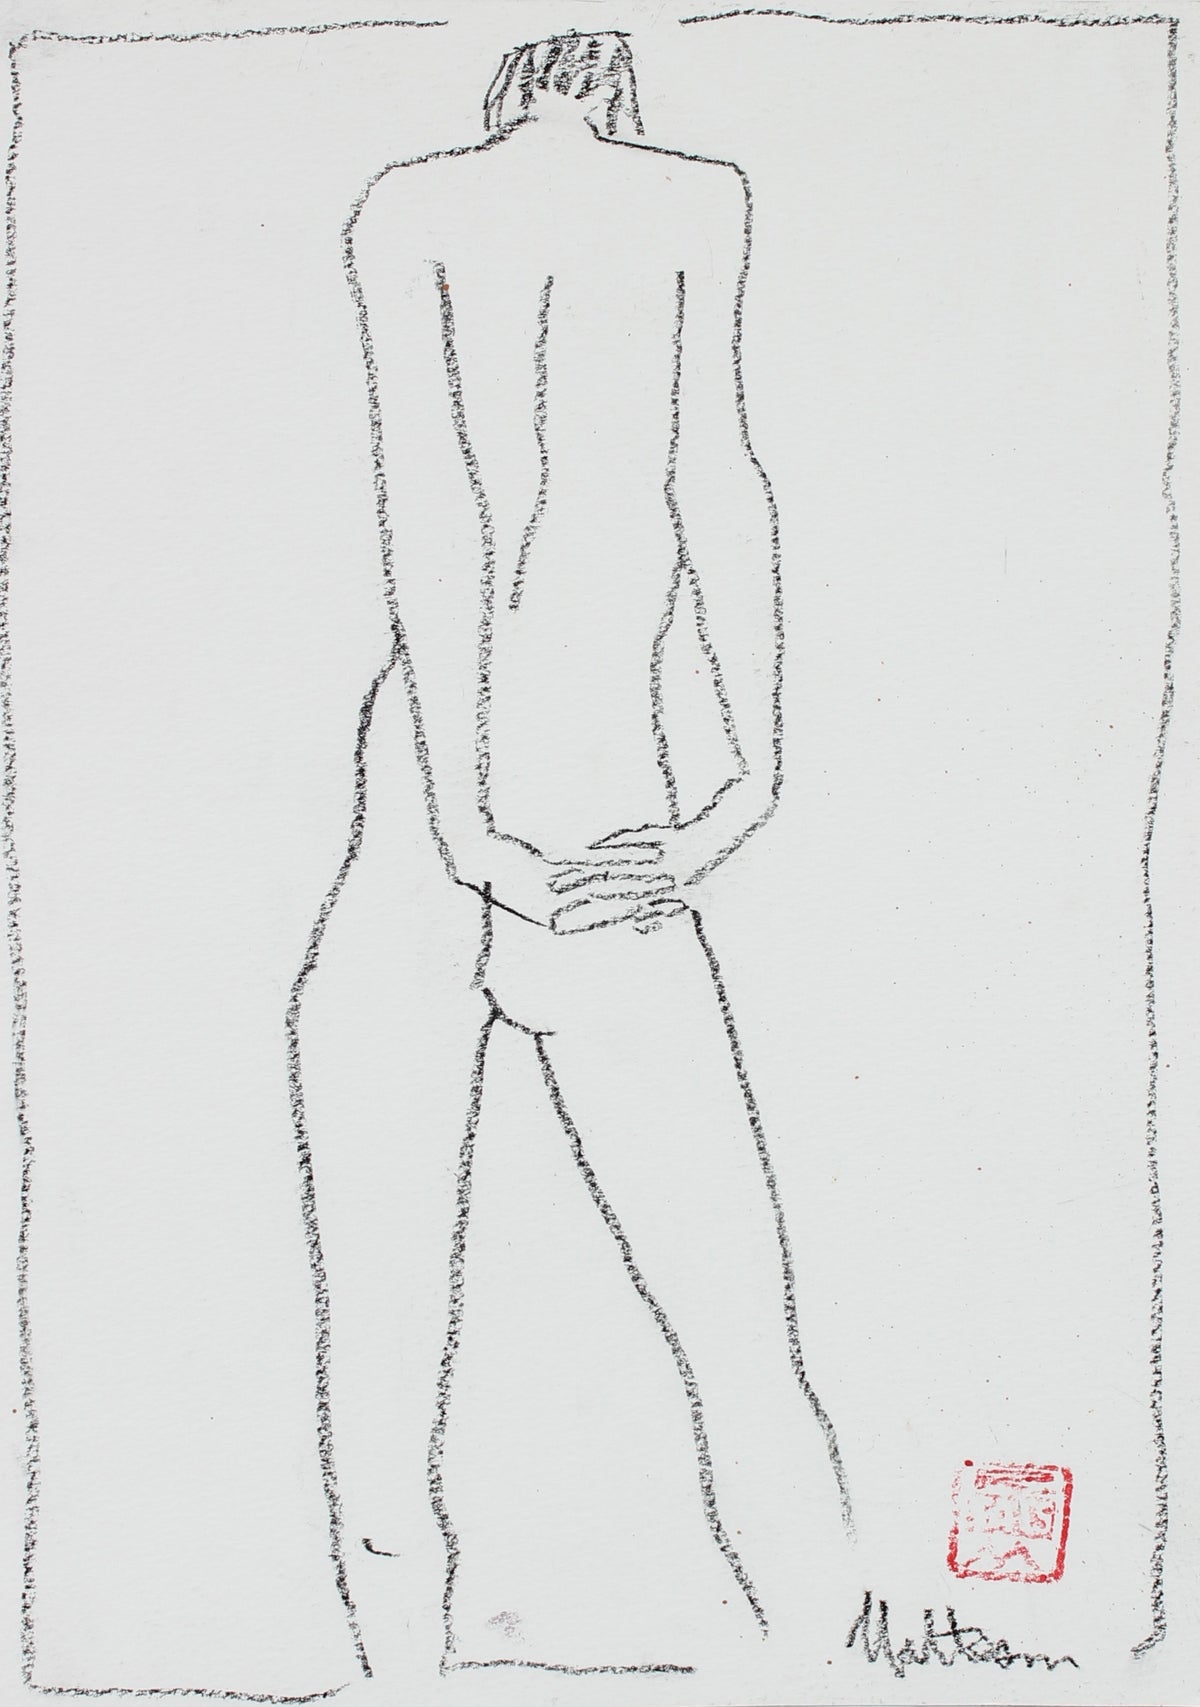 Minimalist Nude From Behind &lt;br&gt;1999 Charcoal &lt;br&gt;&lt;br&gt;#94061